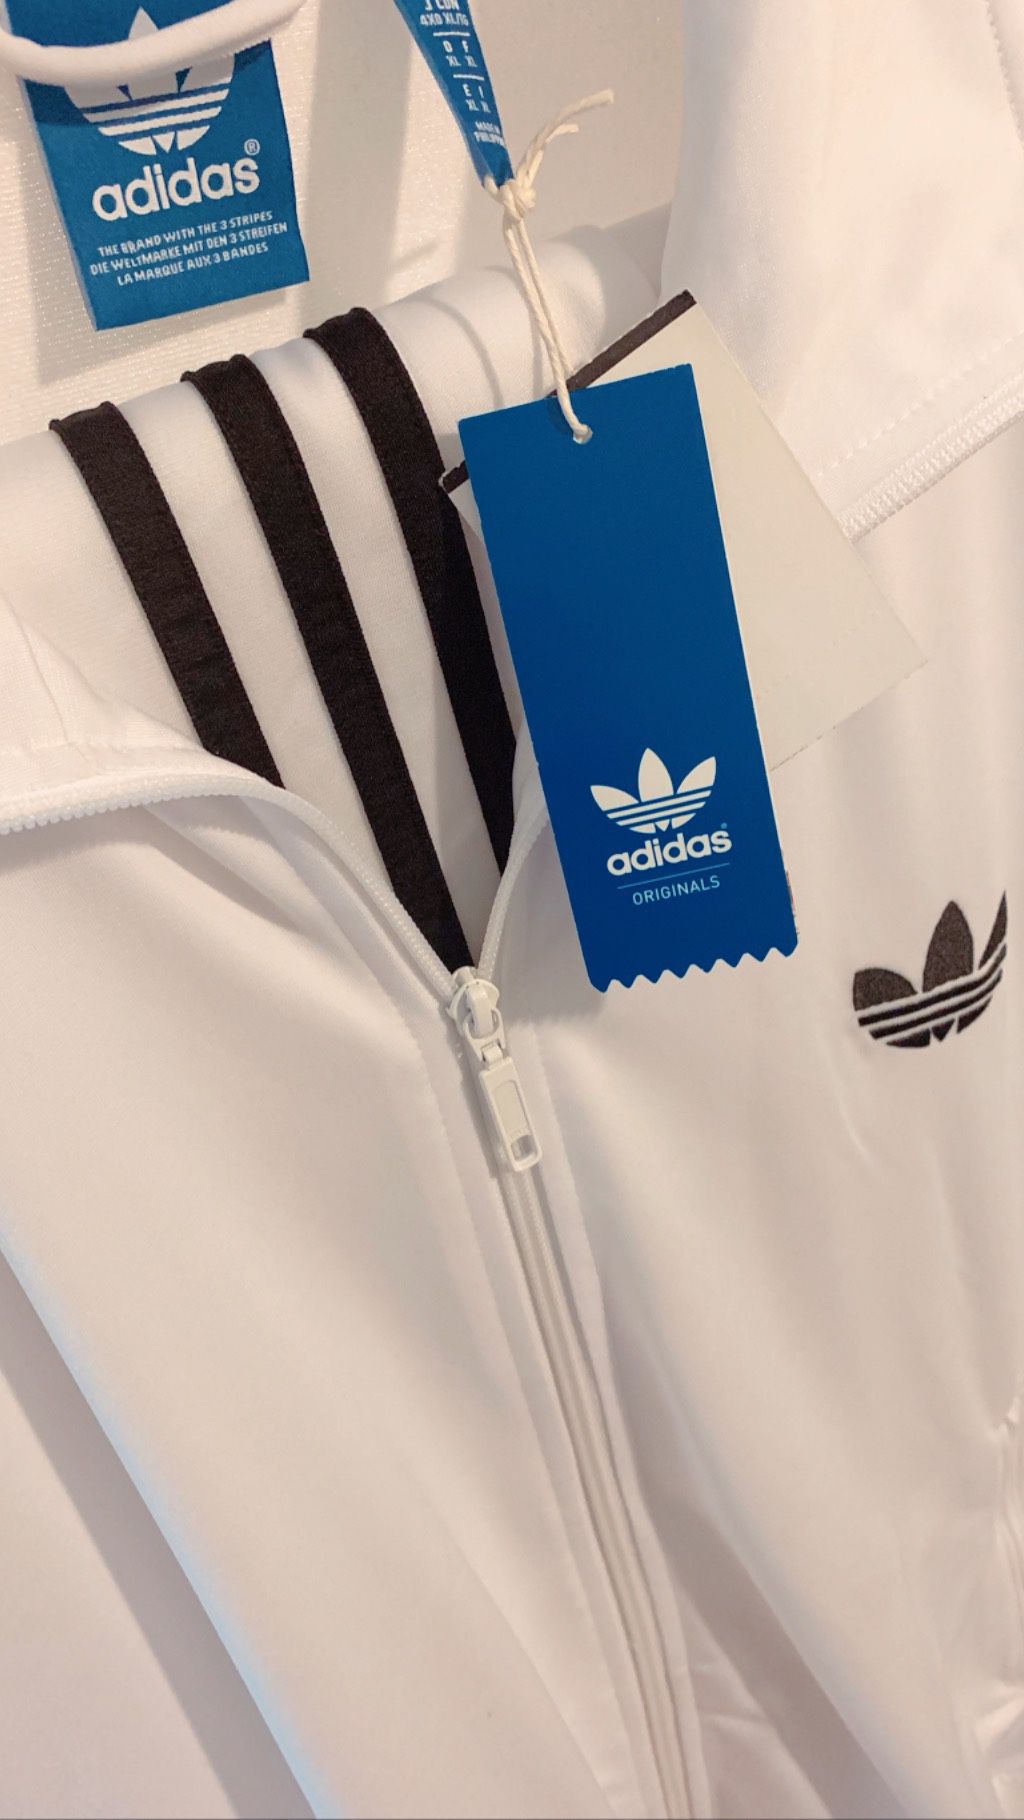 Brand New Adidas Originals All White Tracksuit Jacket and Pants Rare Item